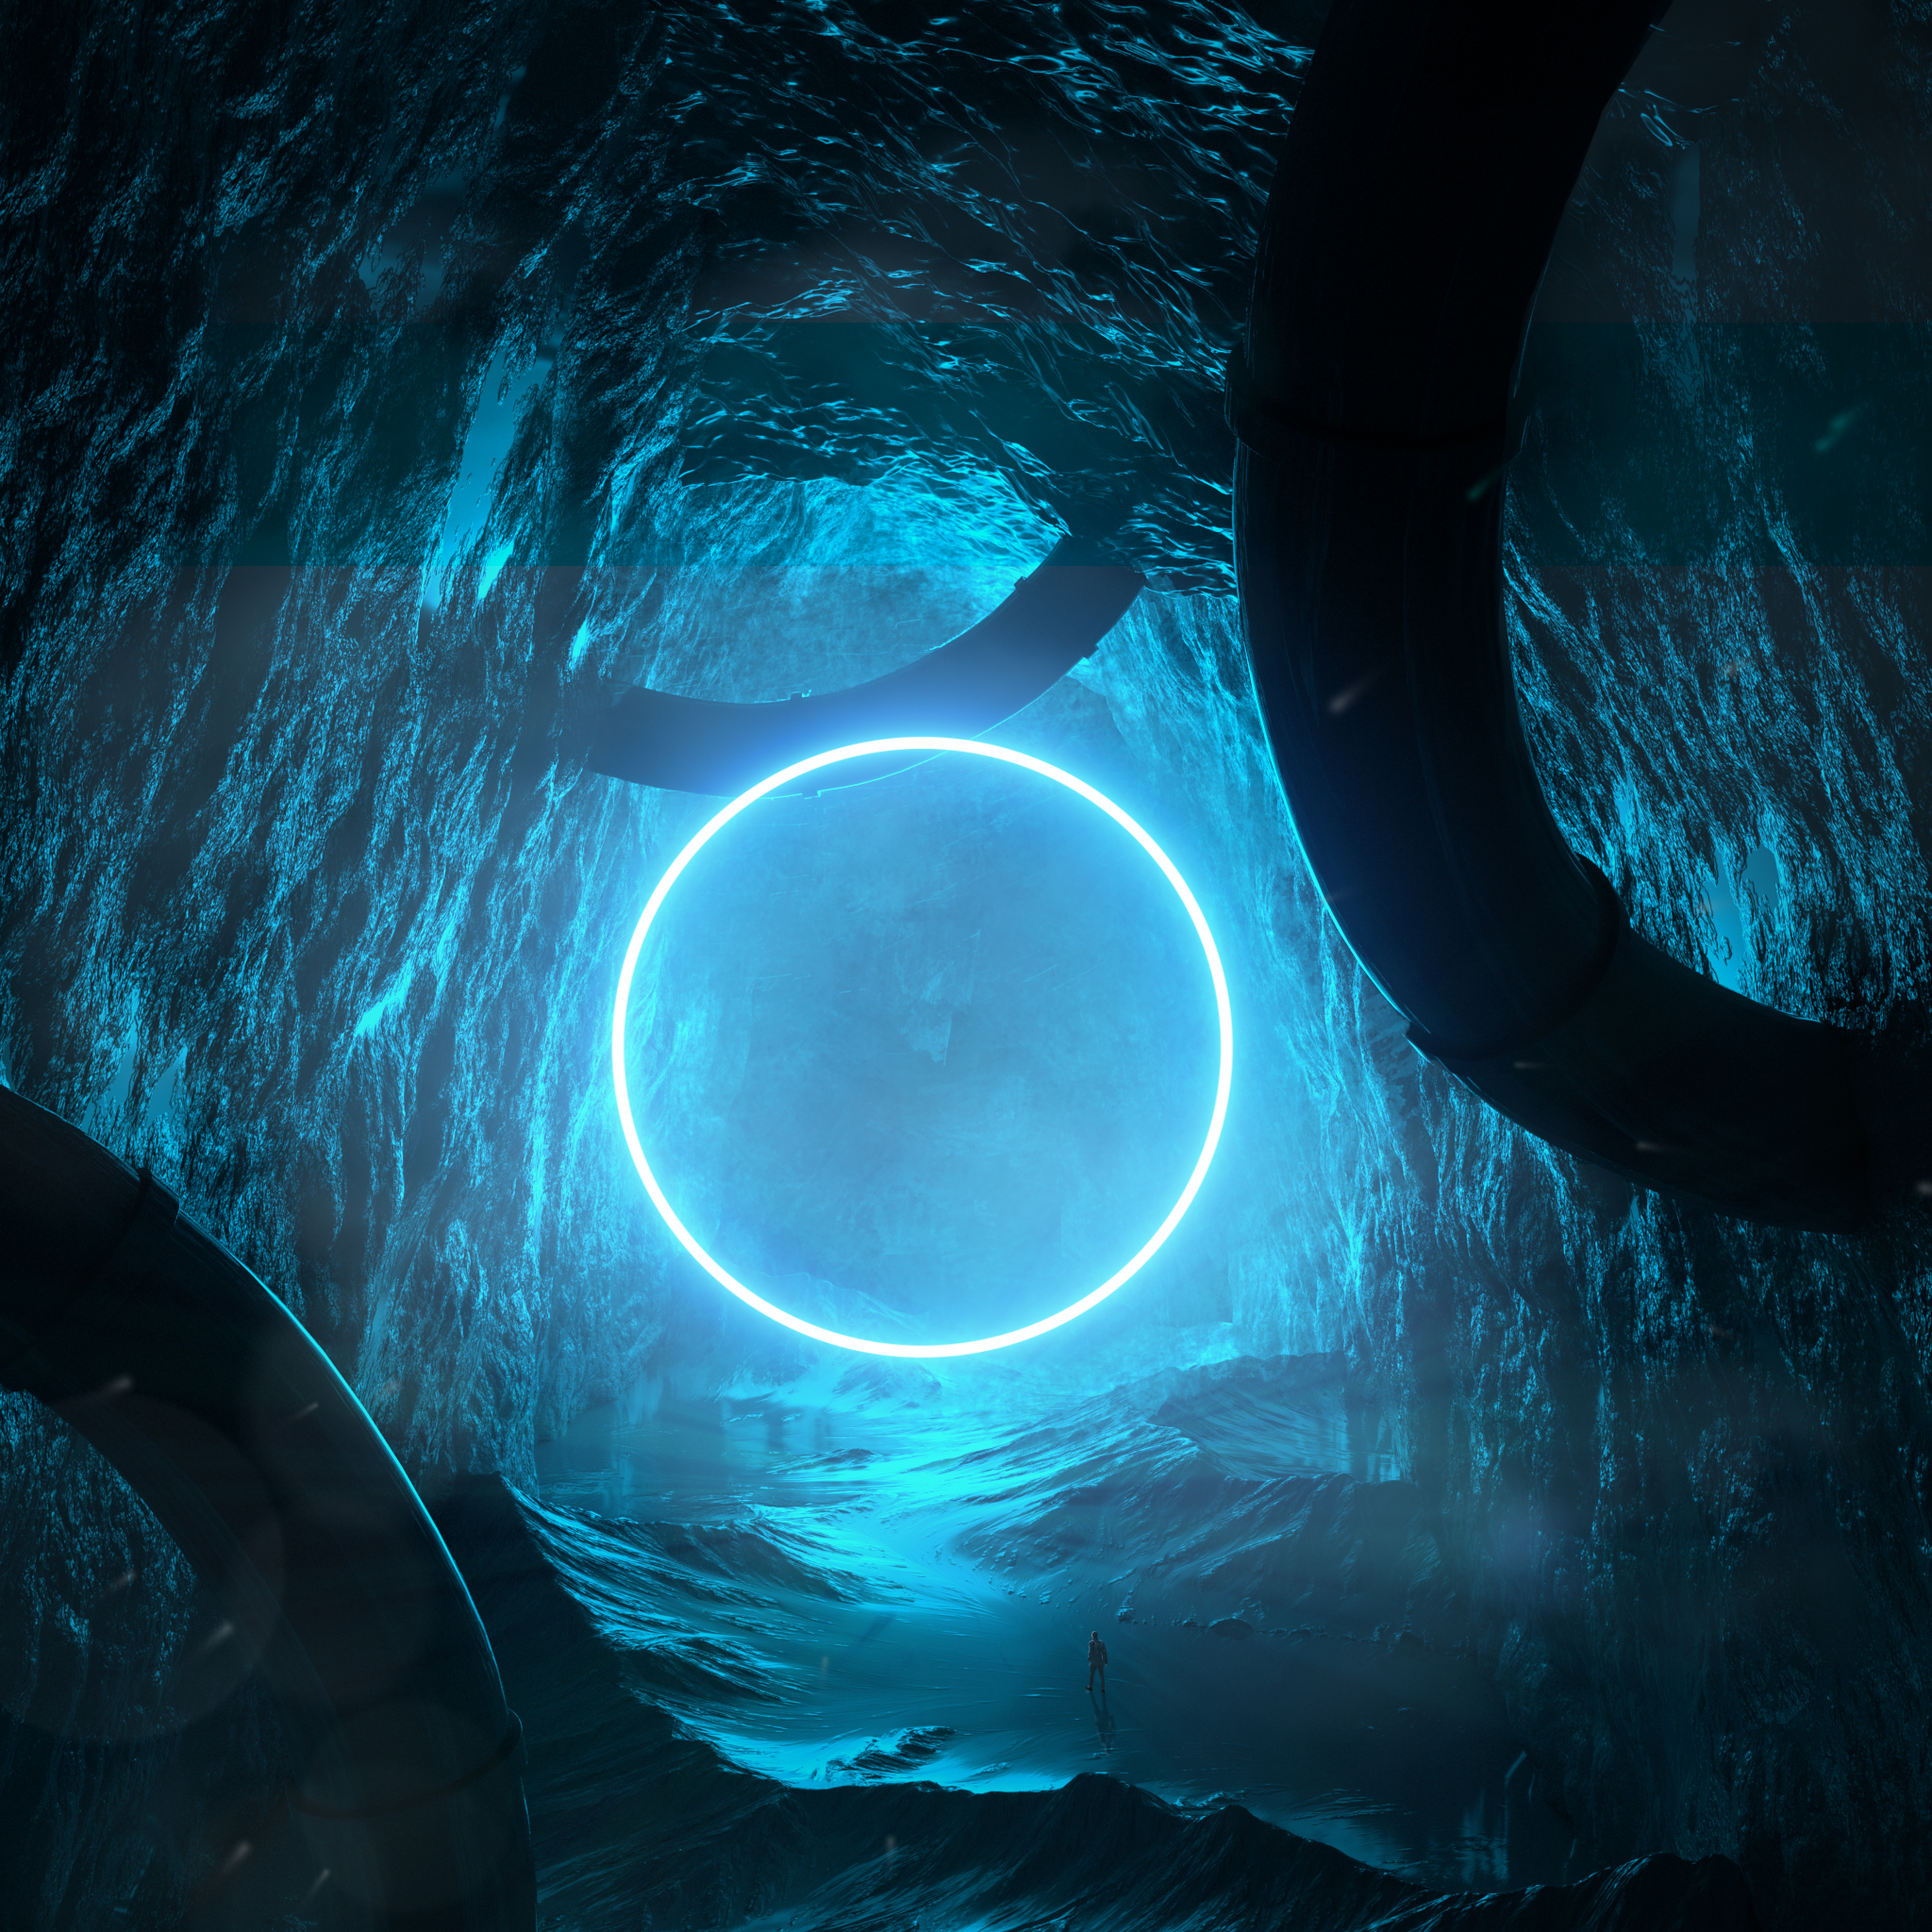 55439 download wallpaper 3d, bright, glow, circle, cave screensavers and pictures for free